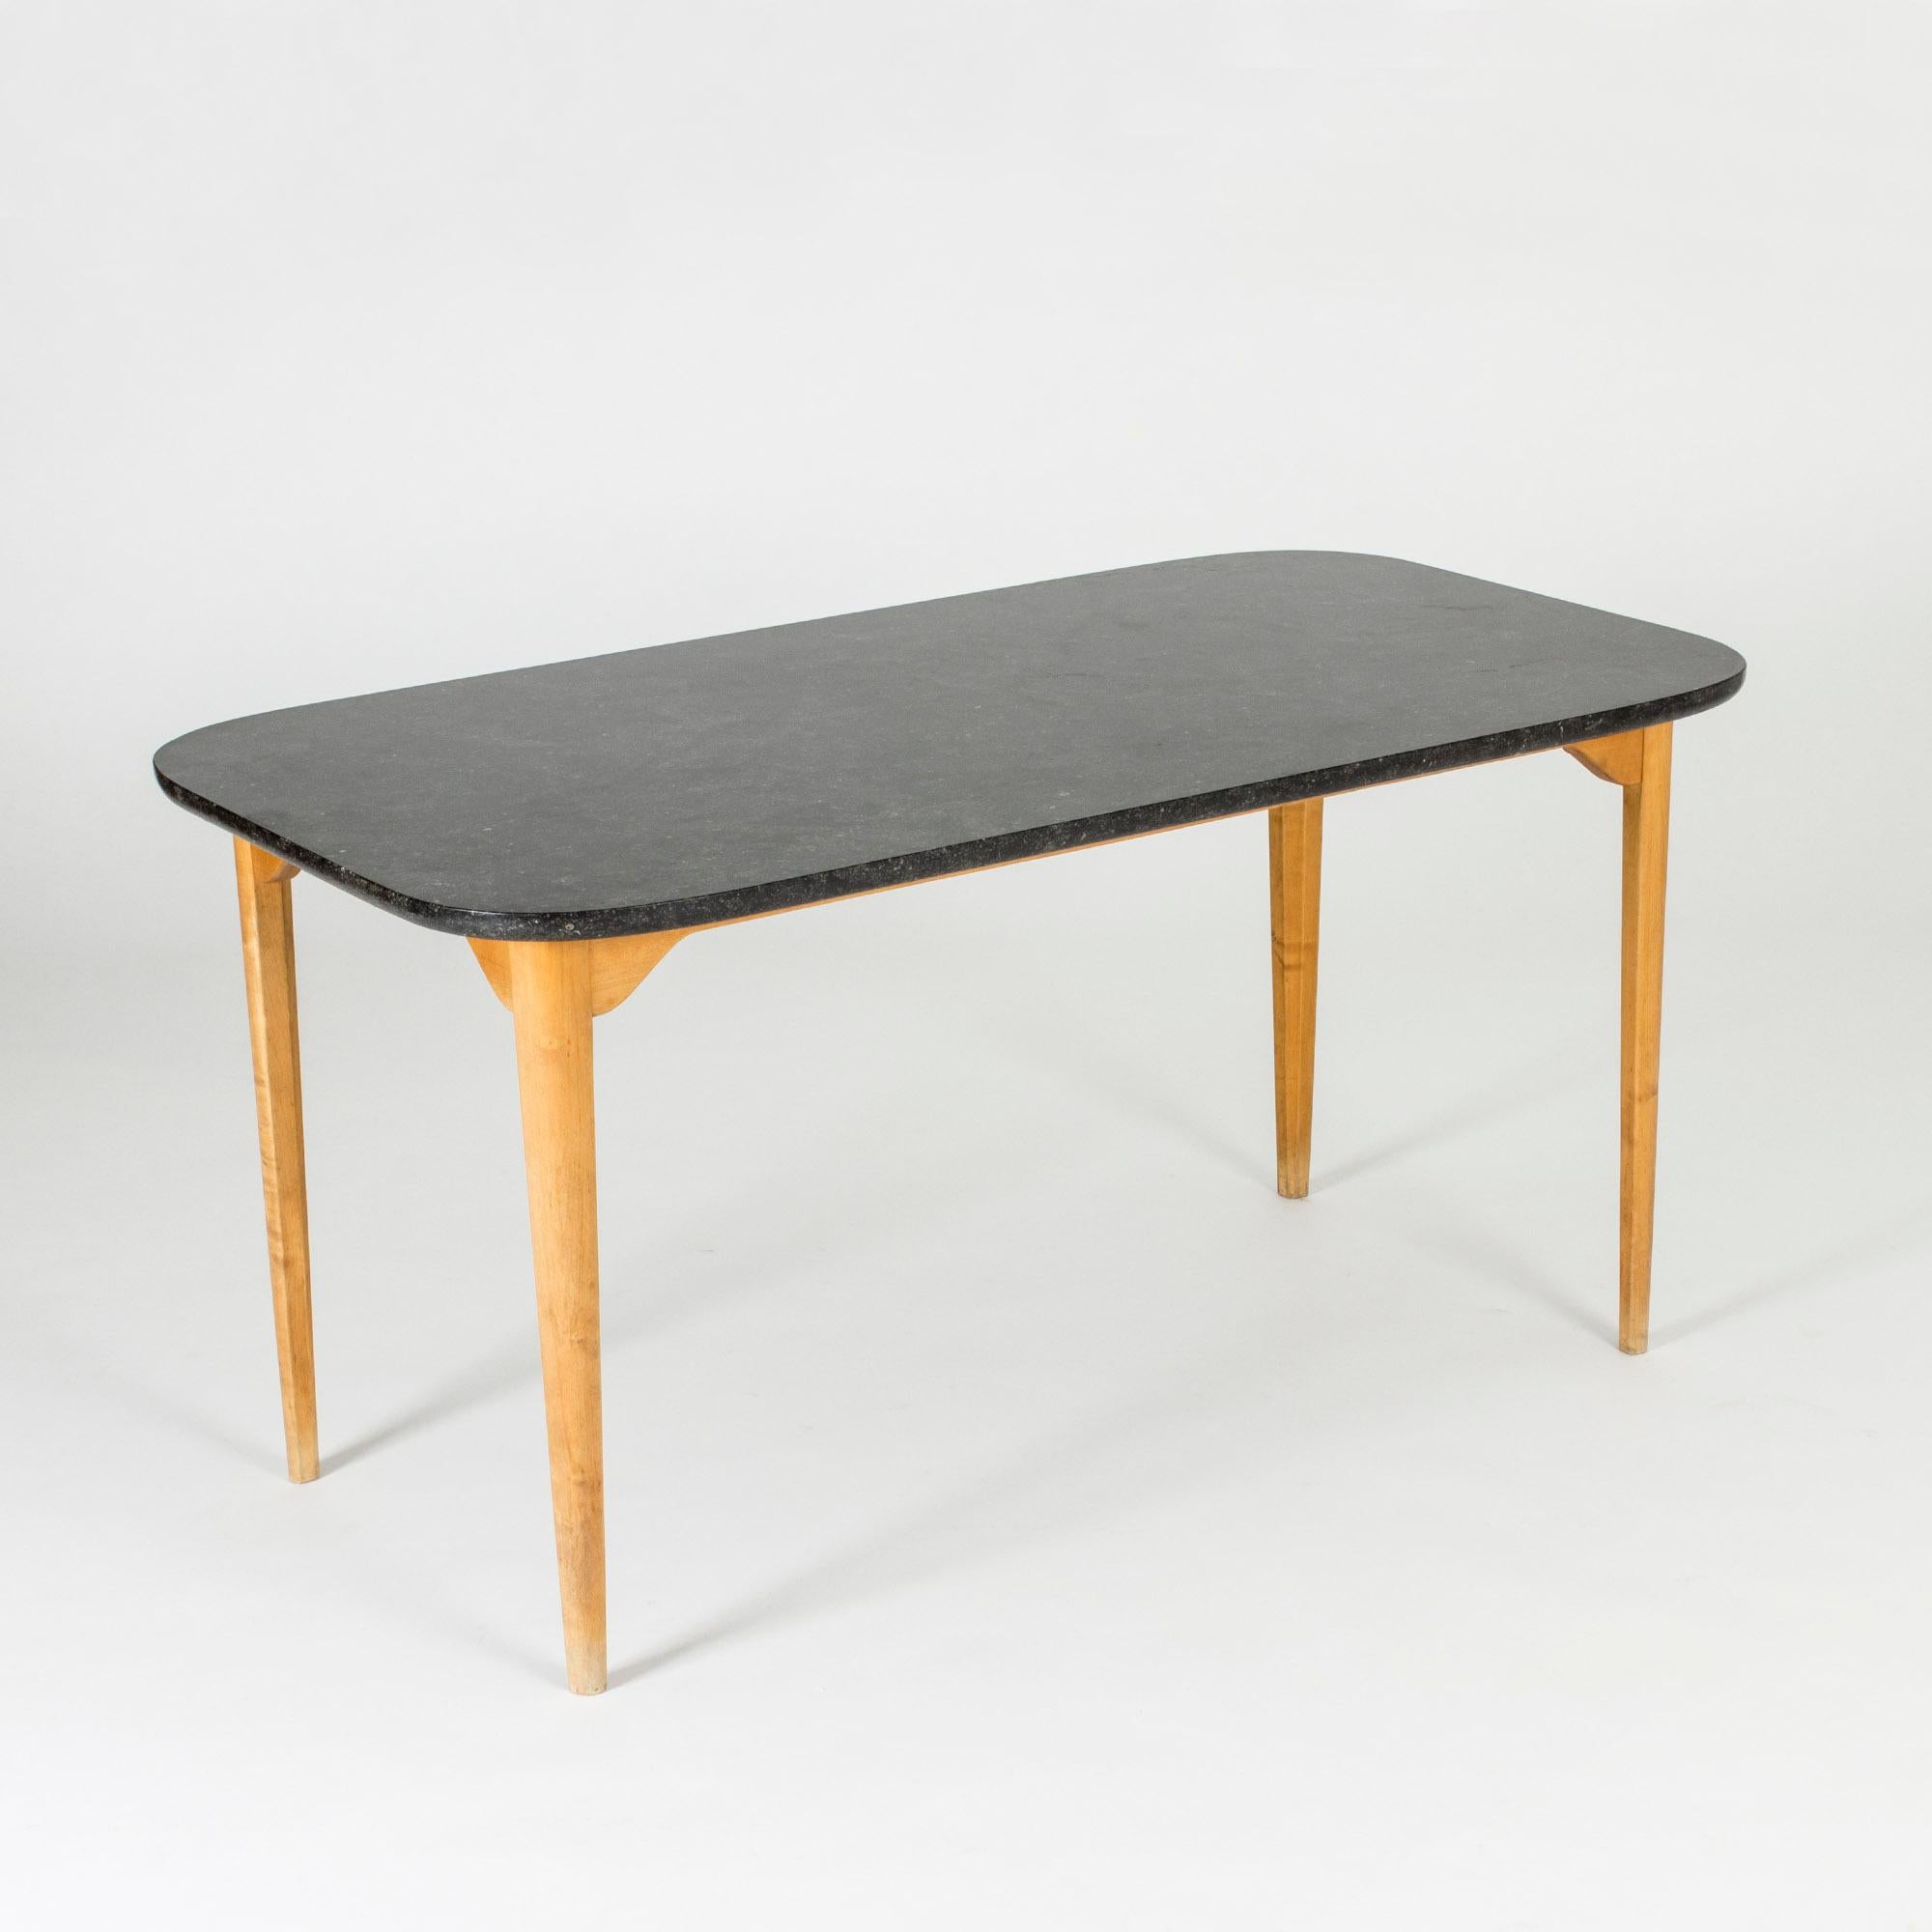 Coffee or playing table by Axel Larsson. Heavy black marble table top and birch base with an open and light look. Nice modernist design with a subtle traditional touch.